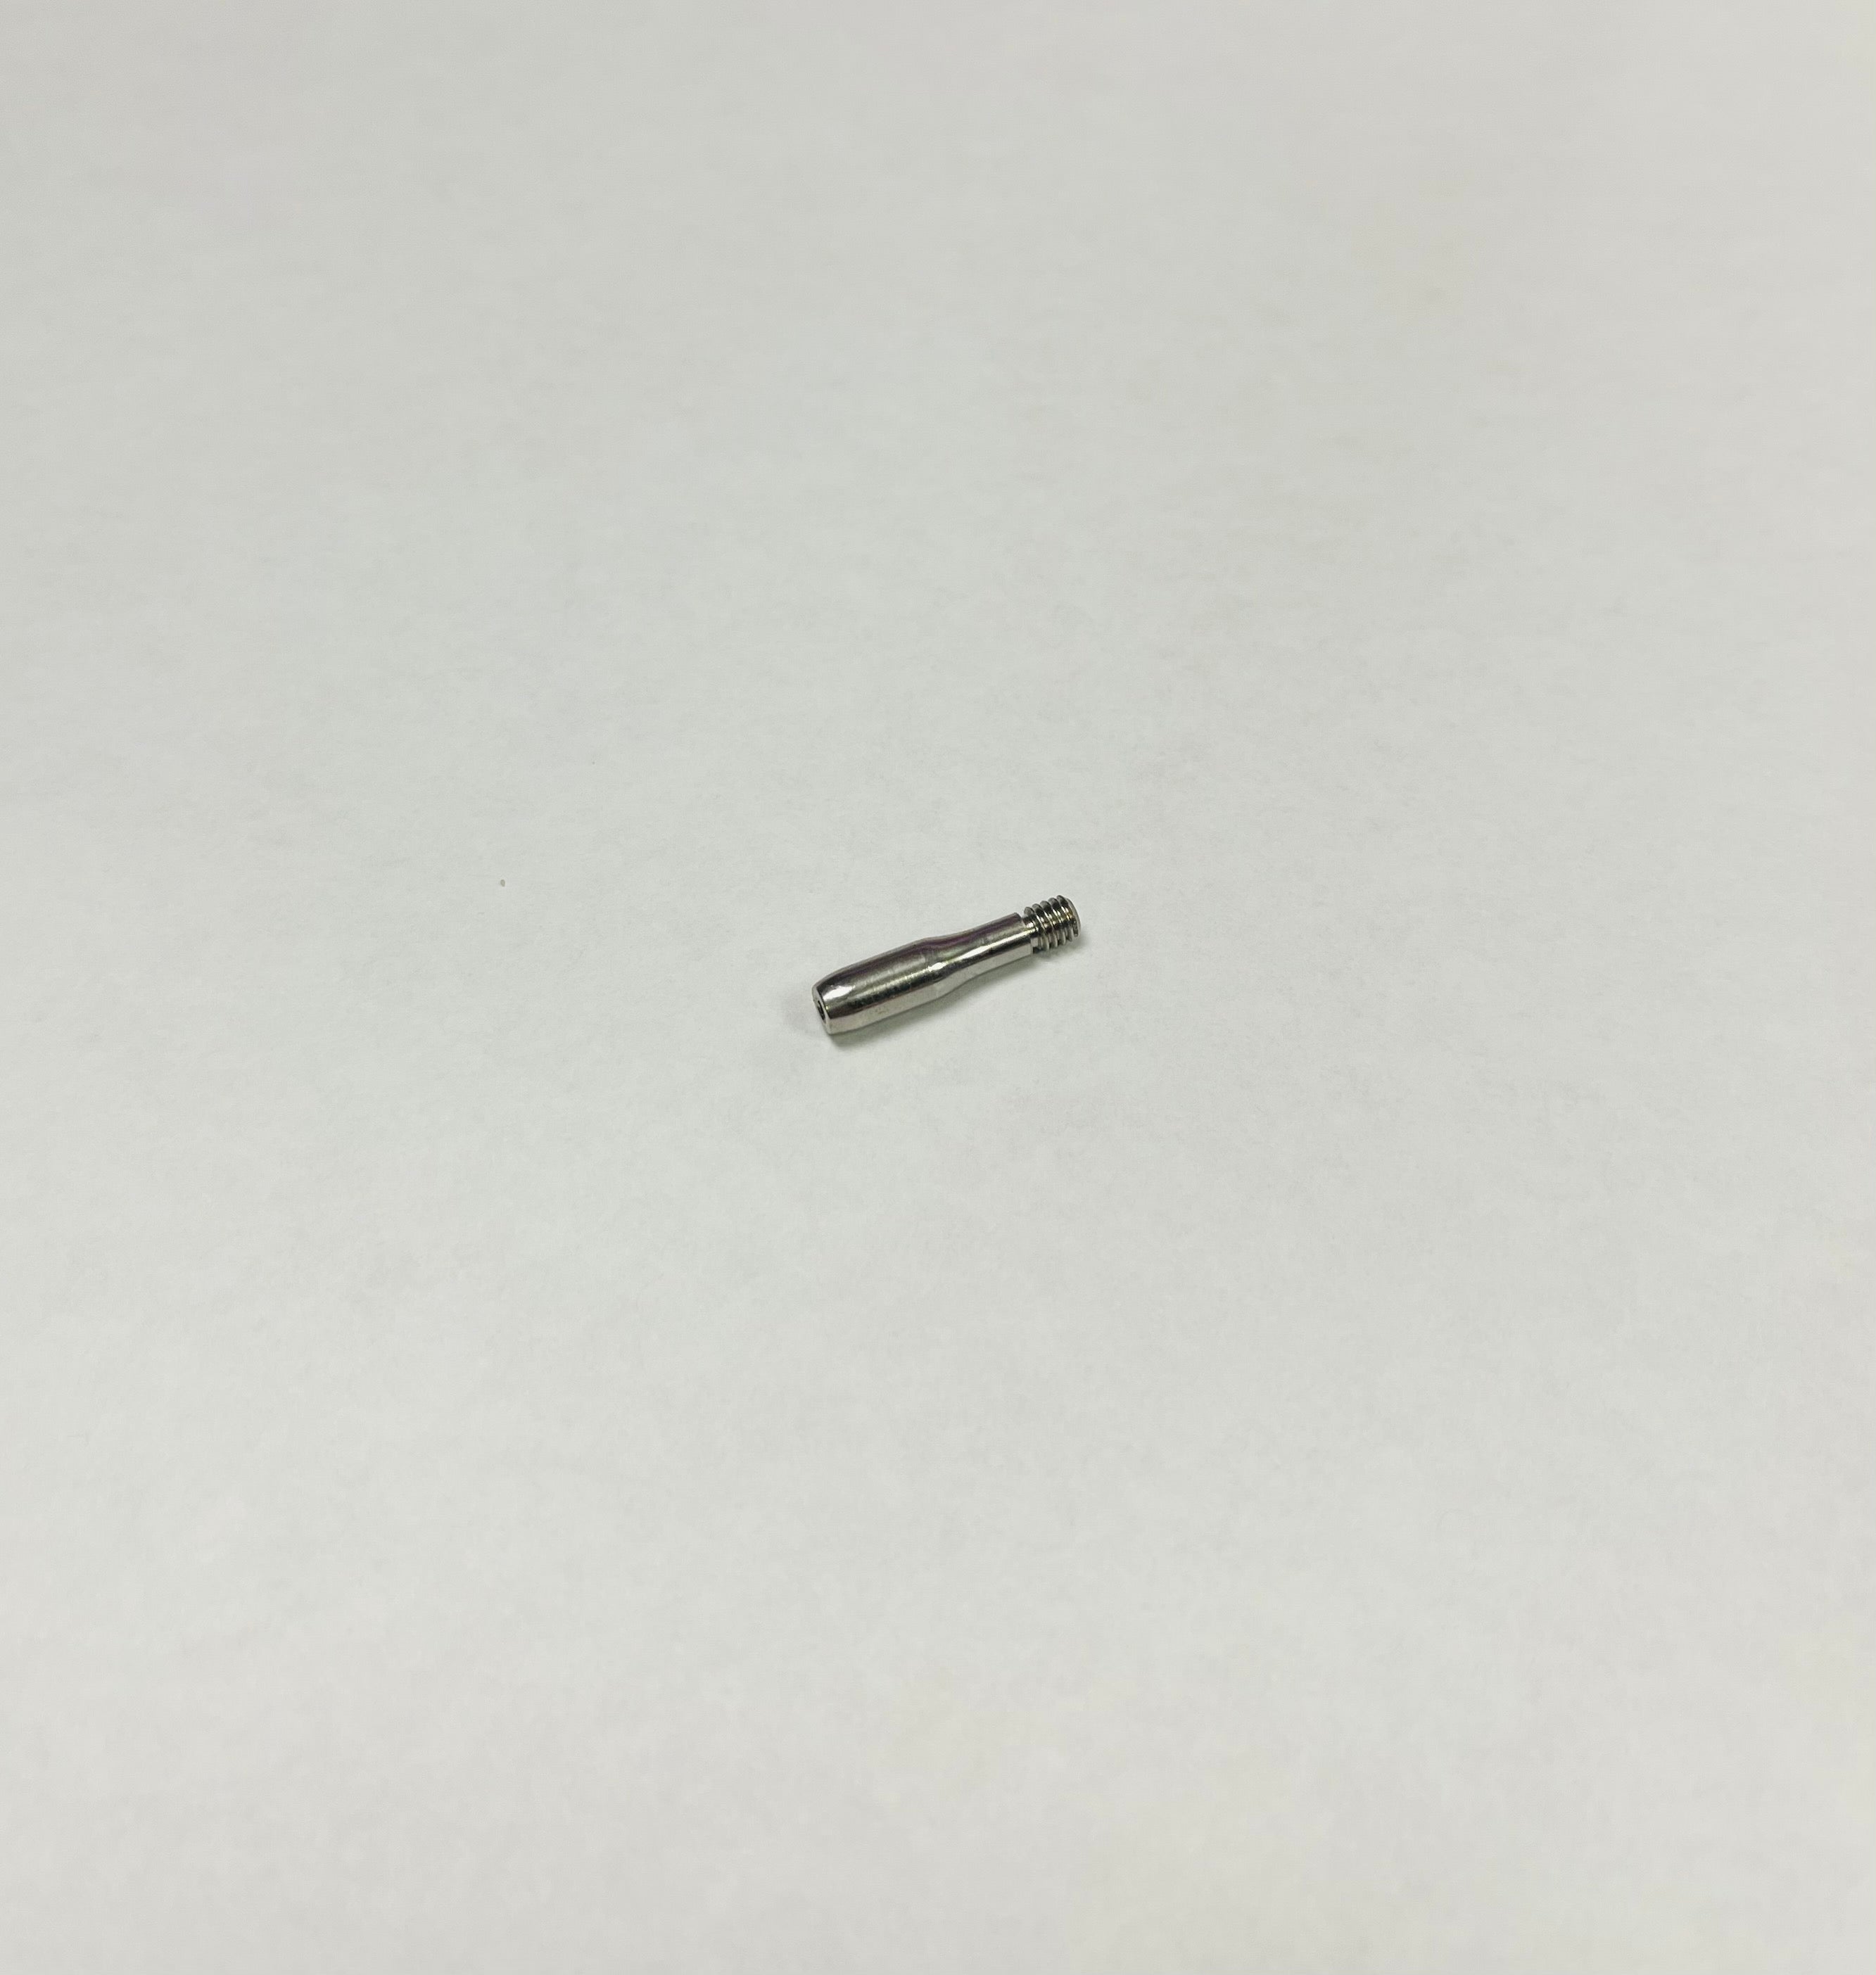 Luxe (Revised) 1.0-2.0 OLED Bolt Spring Nut (LUX344)